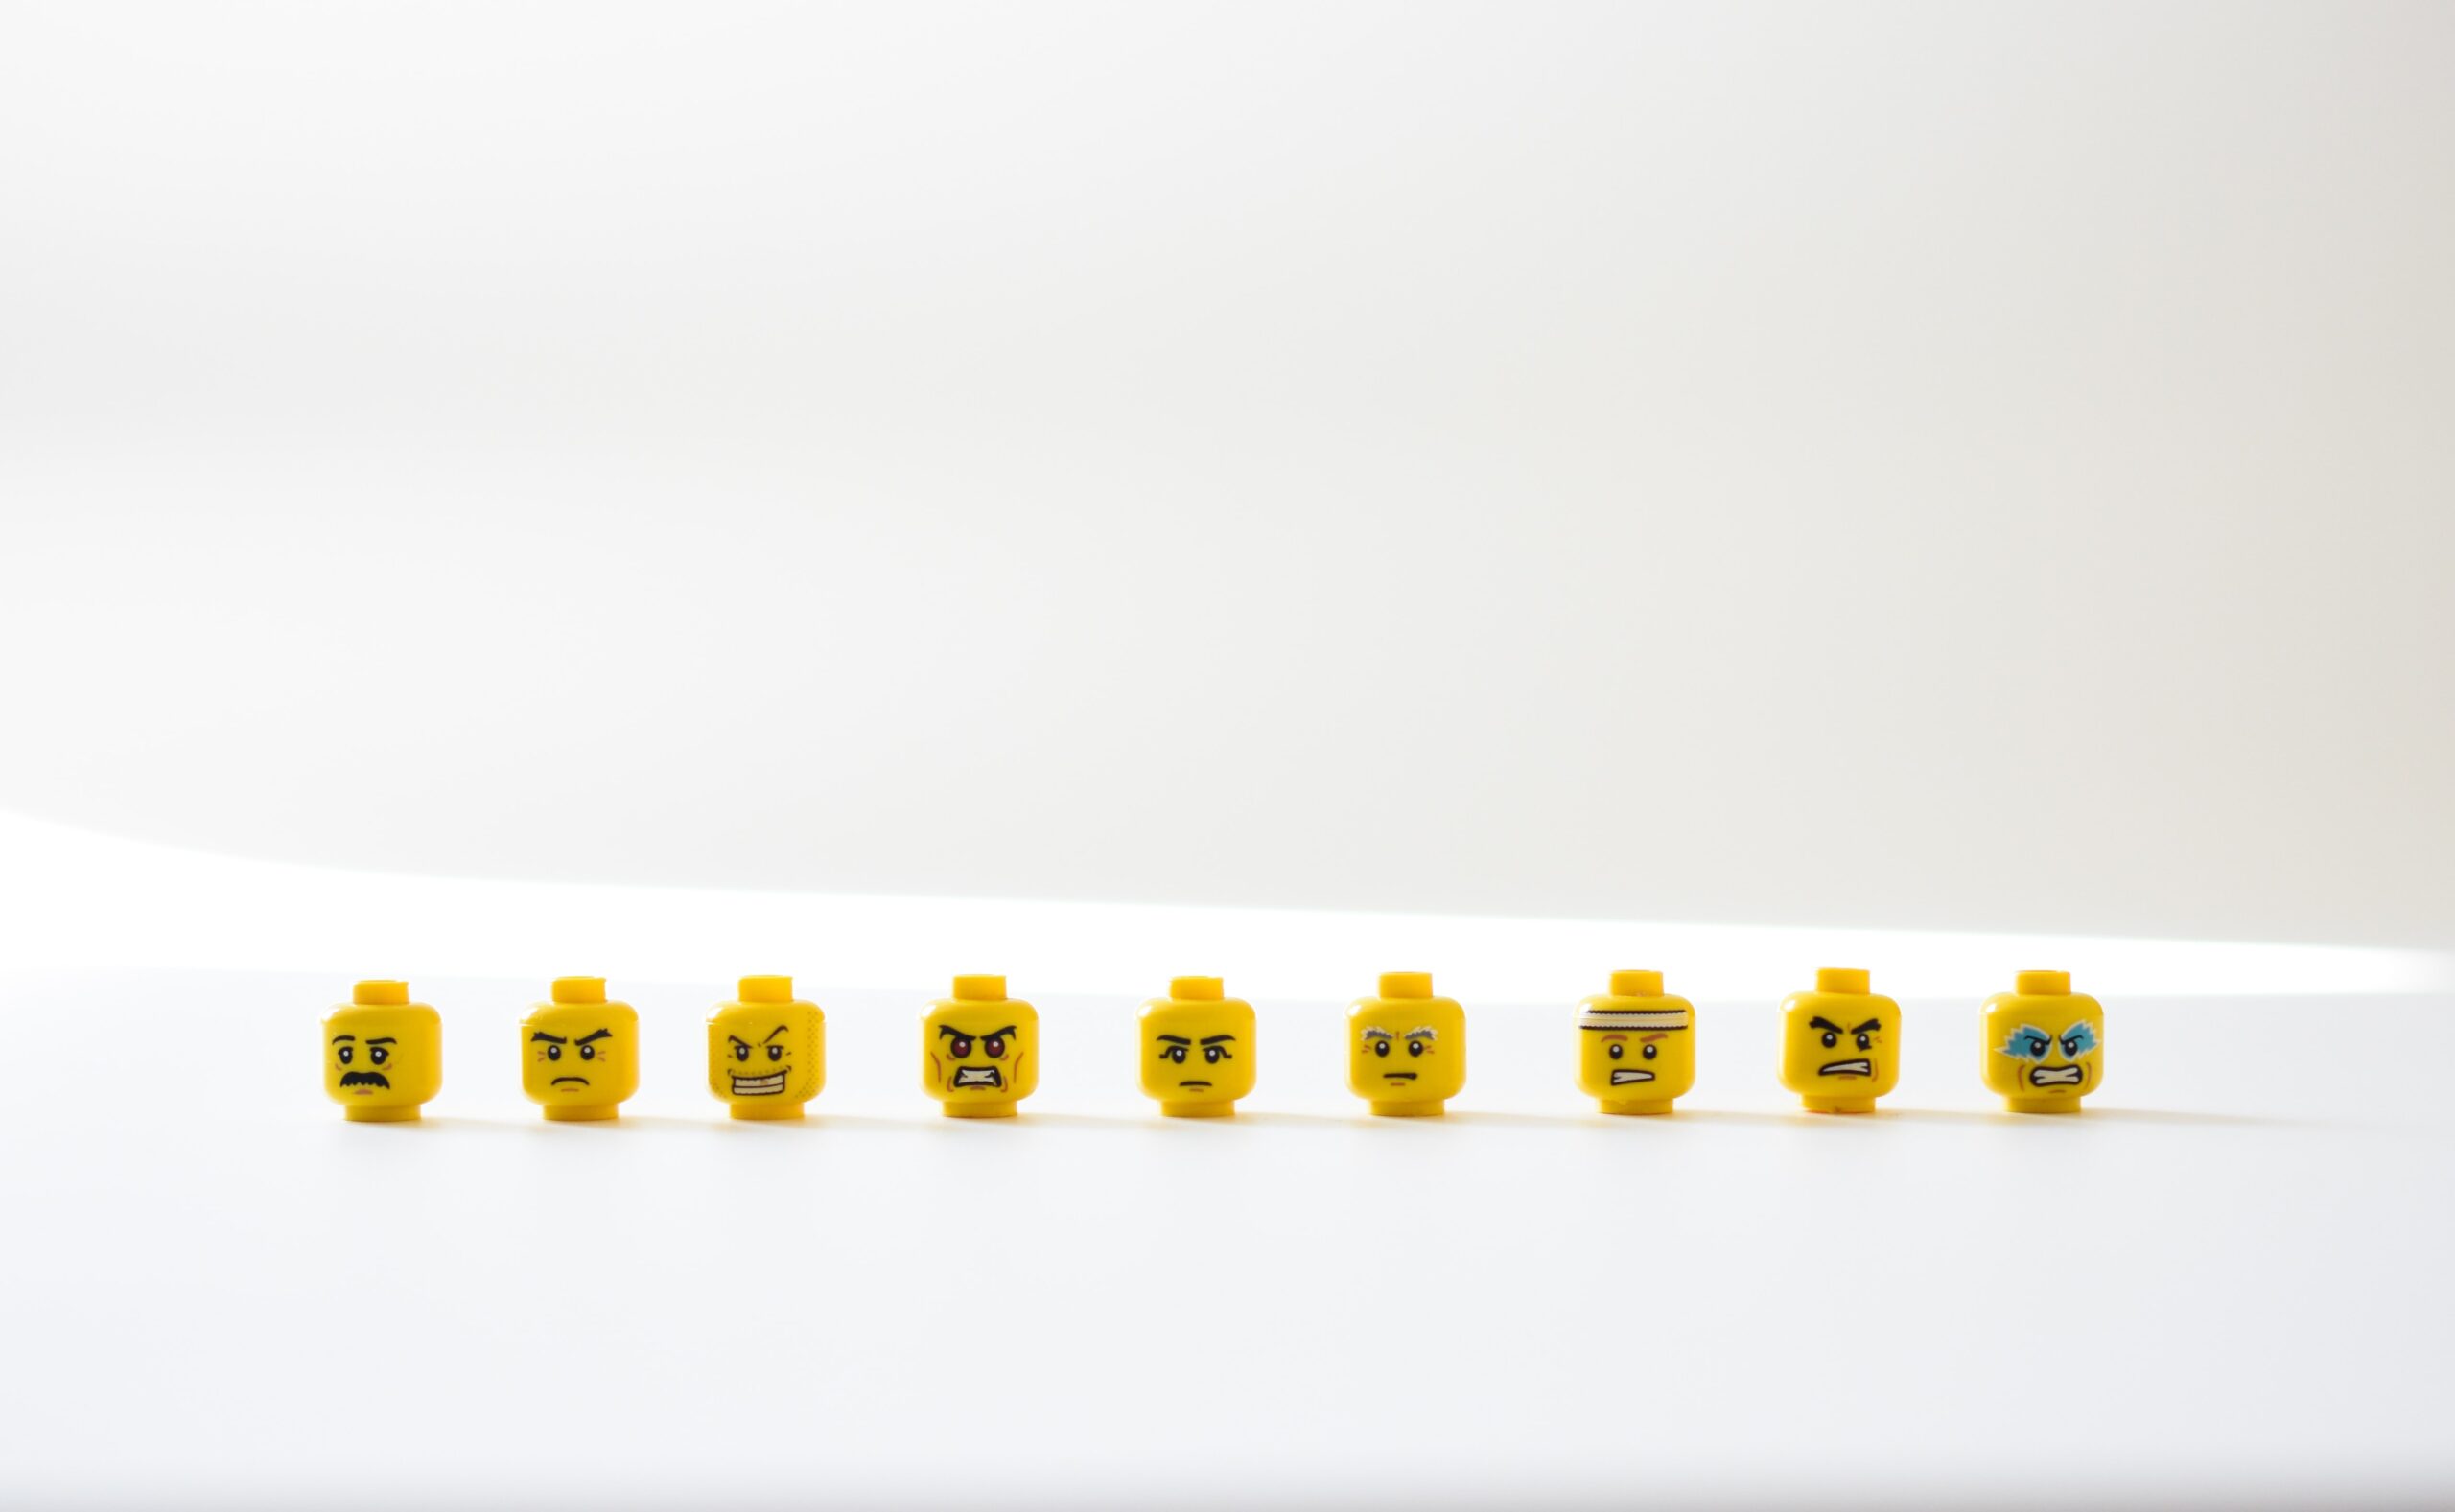 lego faces with different emotions